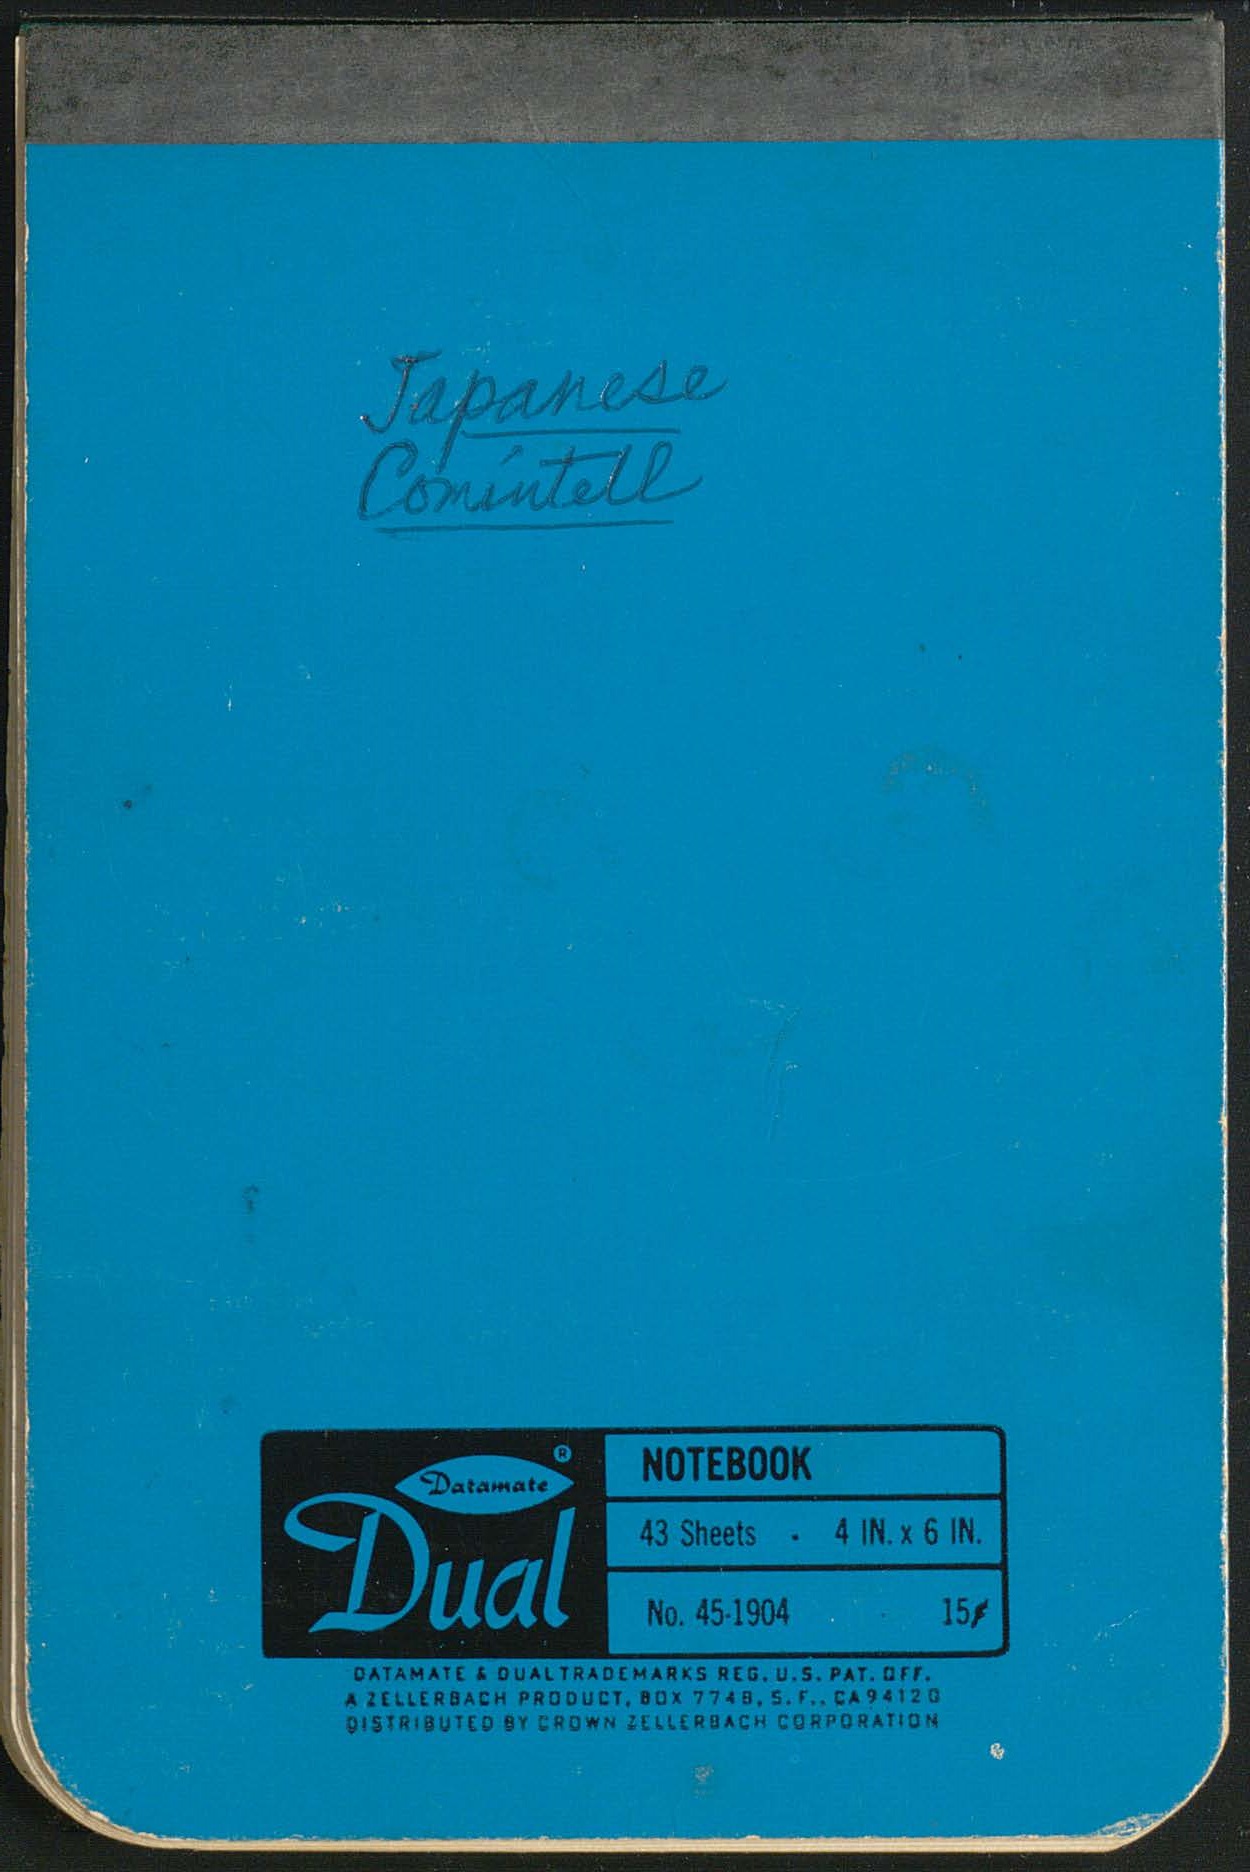 Japanese COMINTELL notebook, by Edwin T. Layton